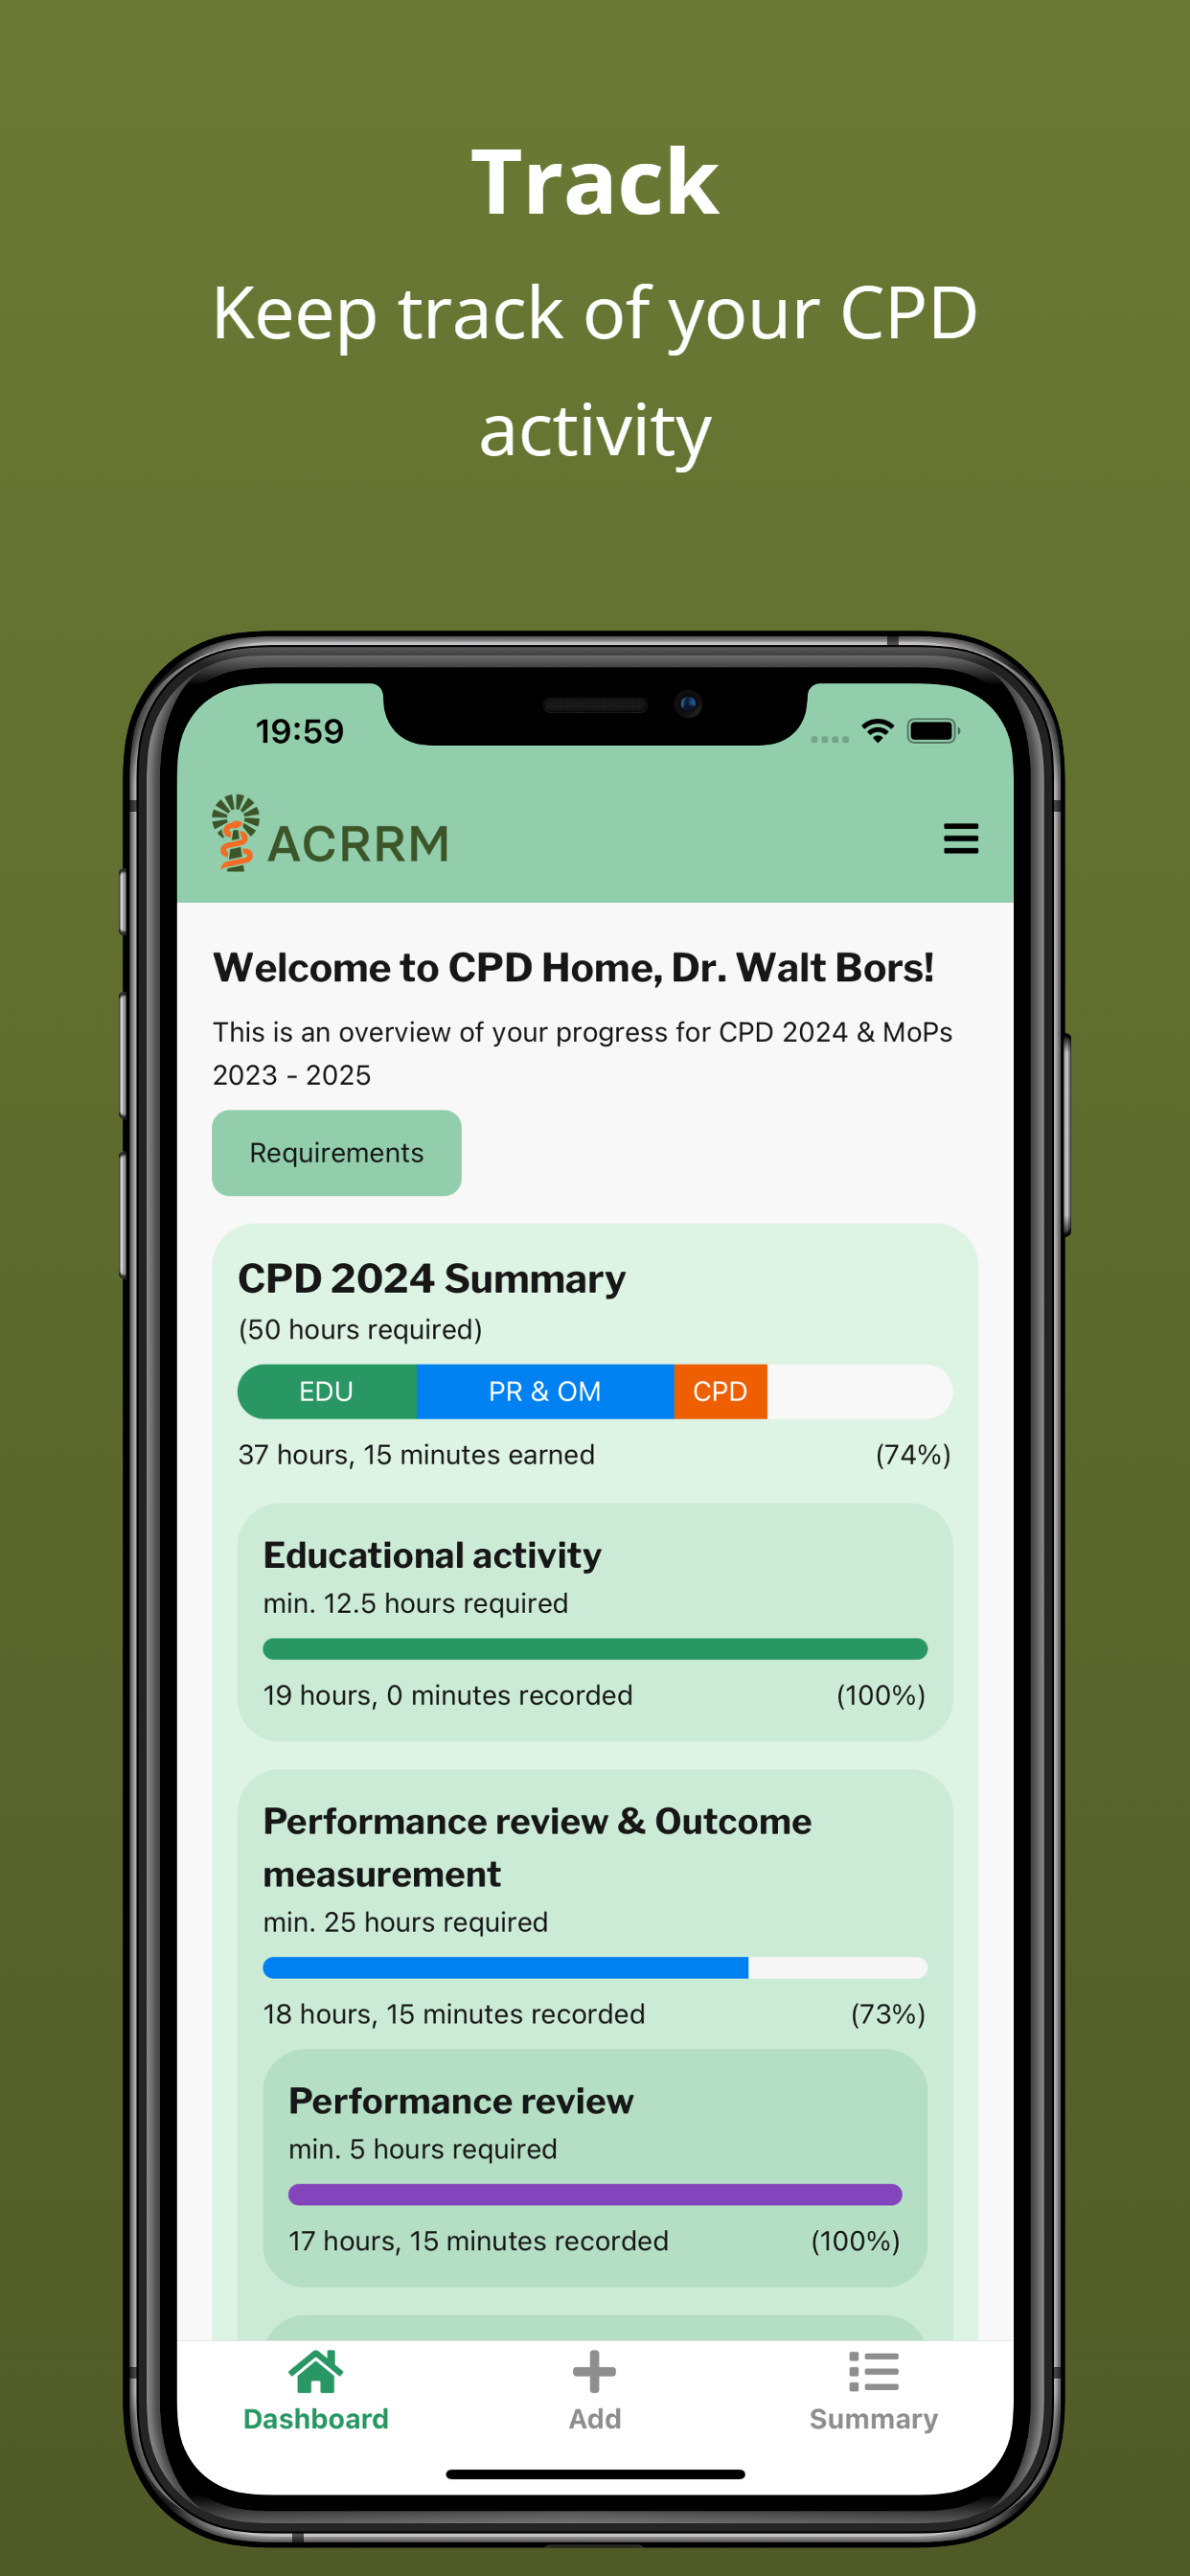 CPD Home app - Track